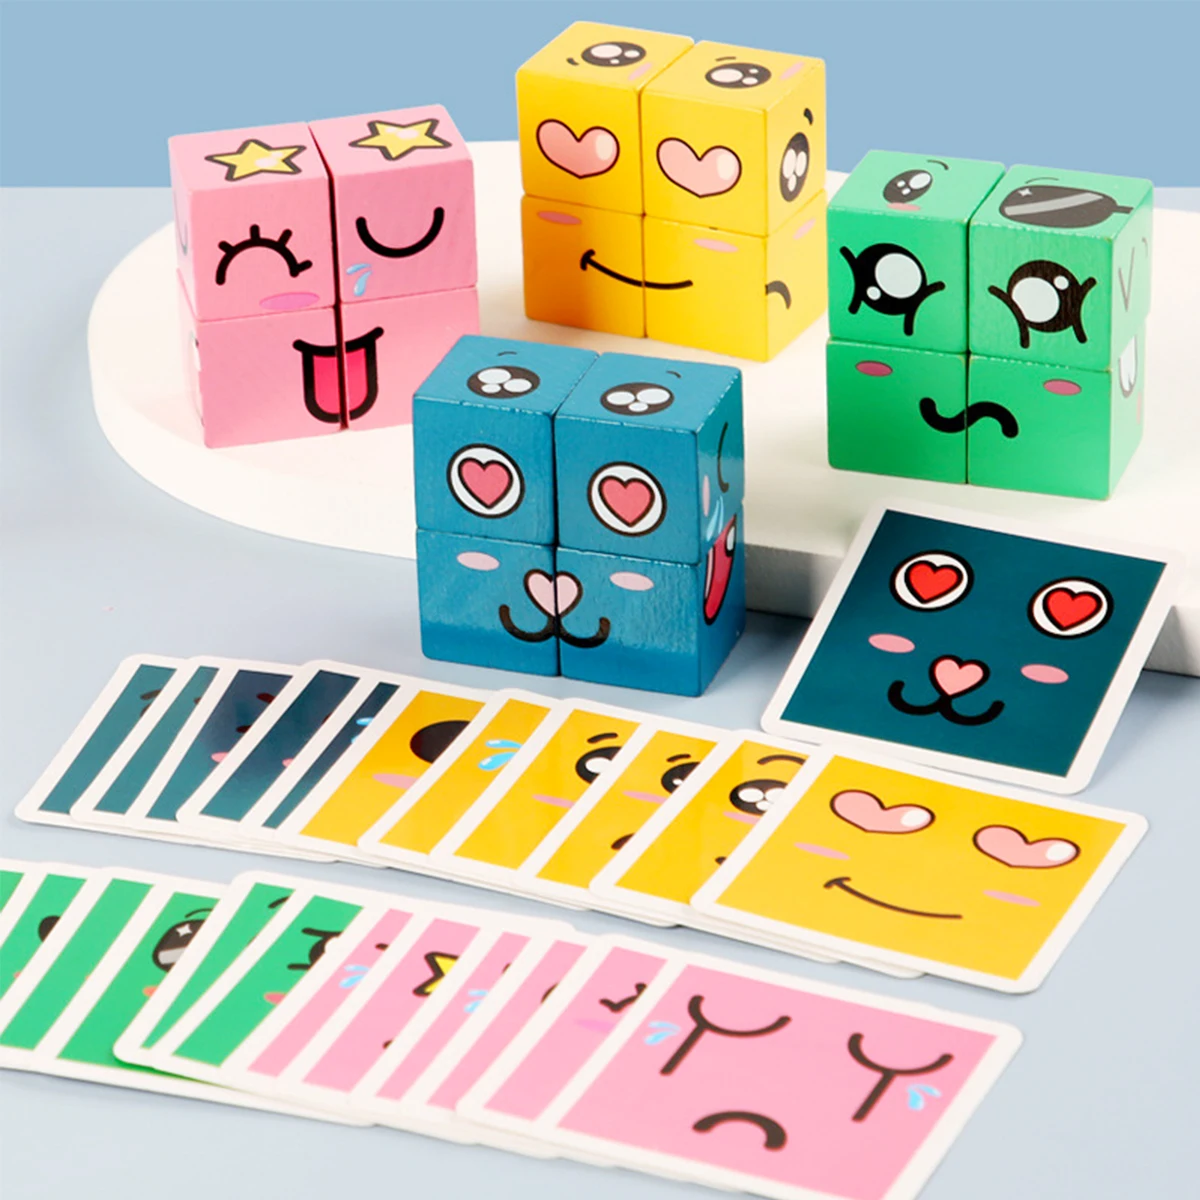 

Children Wooden Expression Puzzles Building Block Magic Face Cube Montessori Educational Toy For Trainning Logical Thinking kids